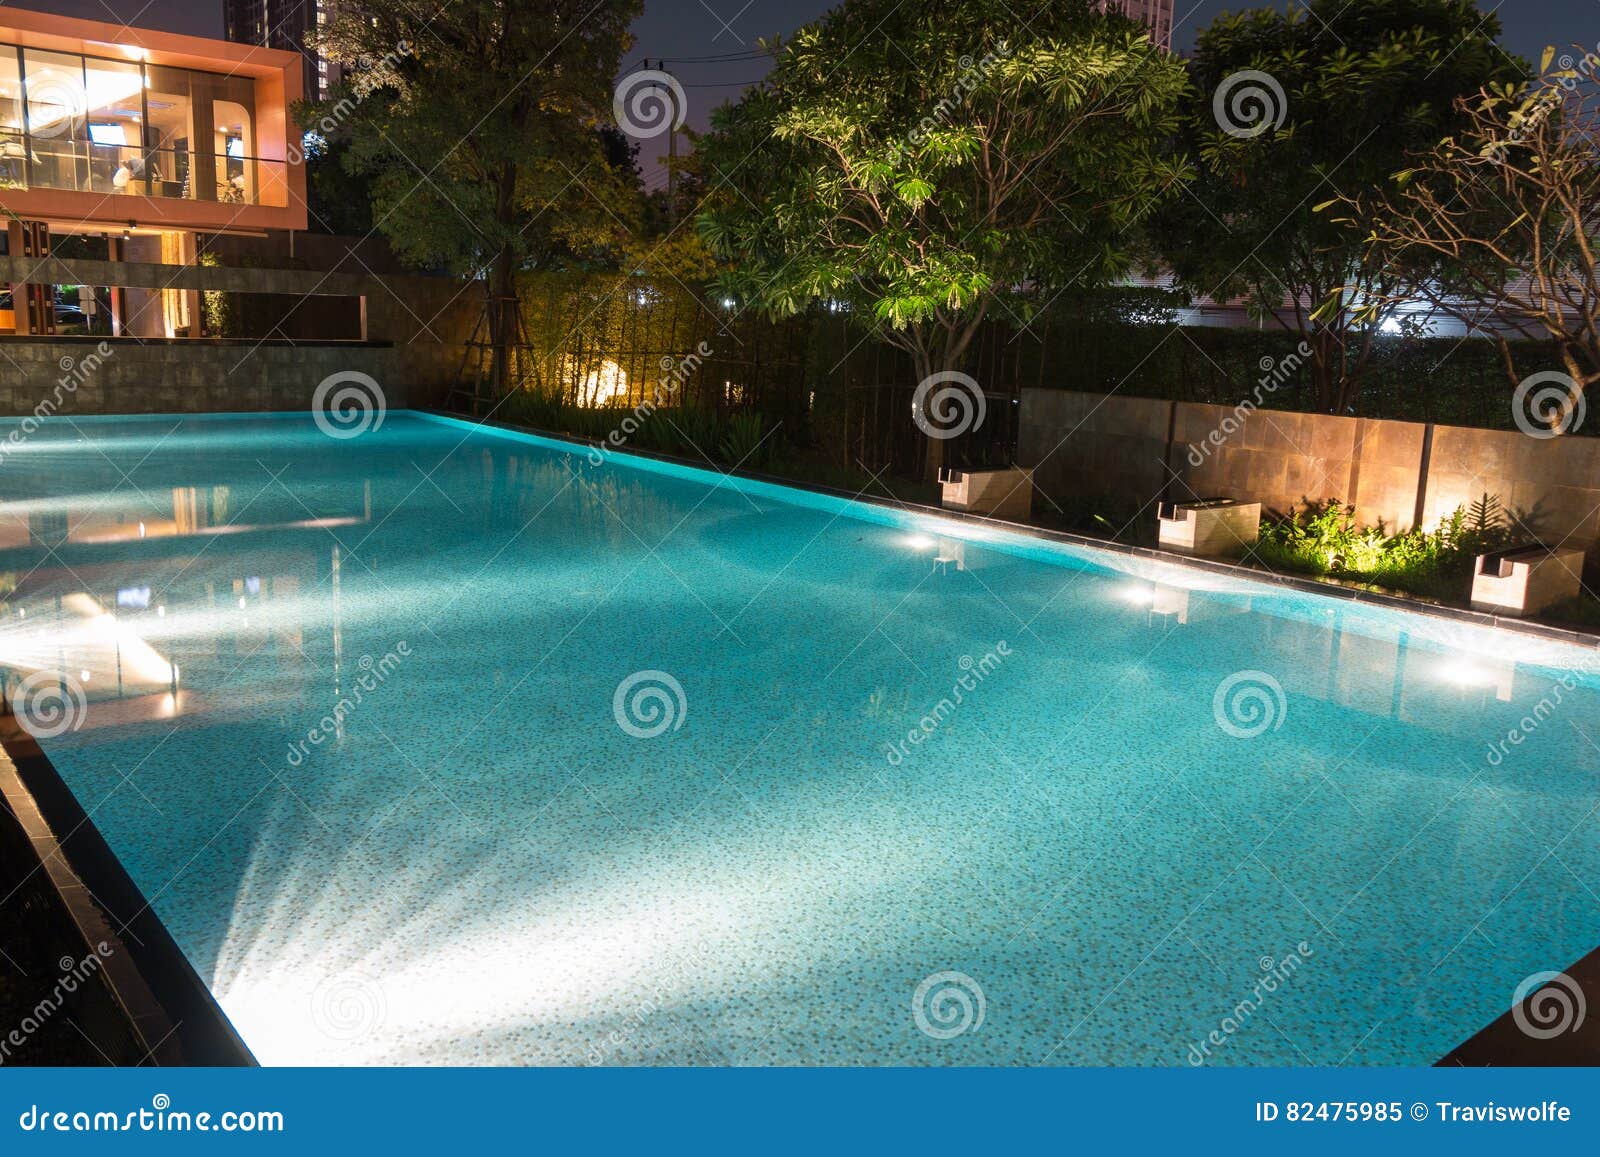 peaceful pool reflections in the evening twilight with warm still water filled to the brim and ready for swimming. bright mood l